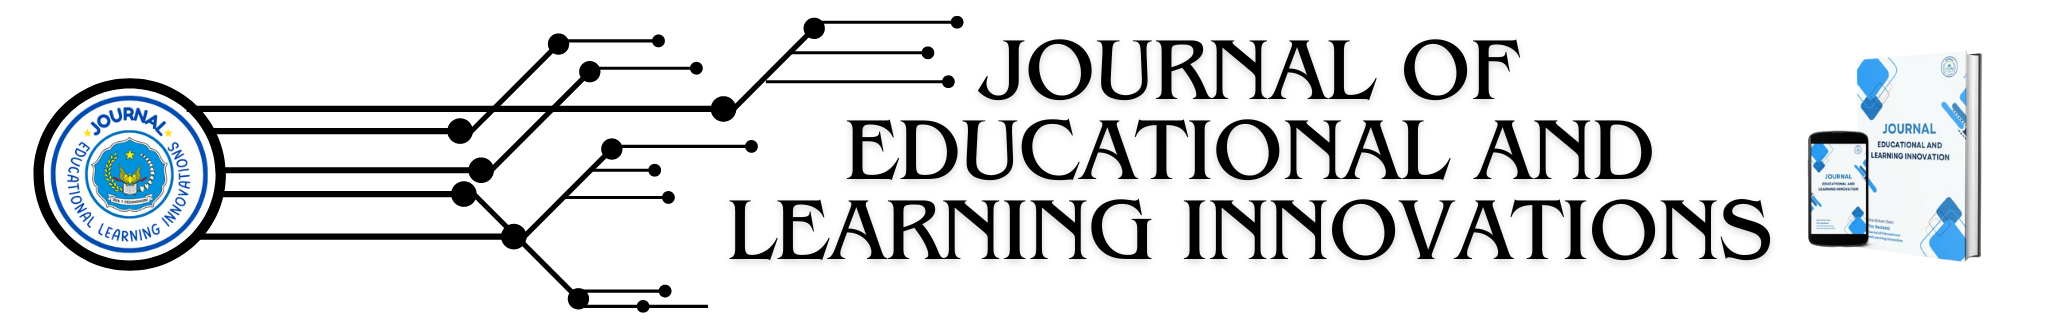 Journal of Educational and Learning Innovations